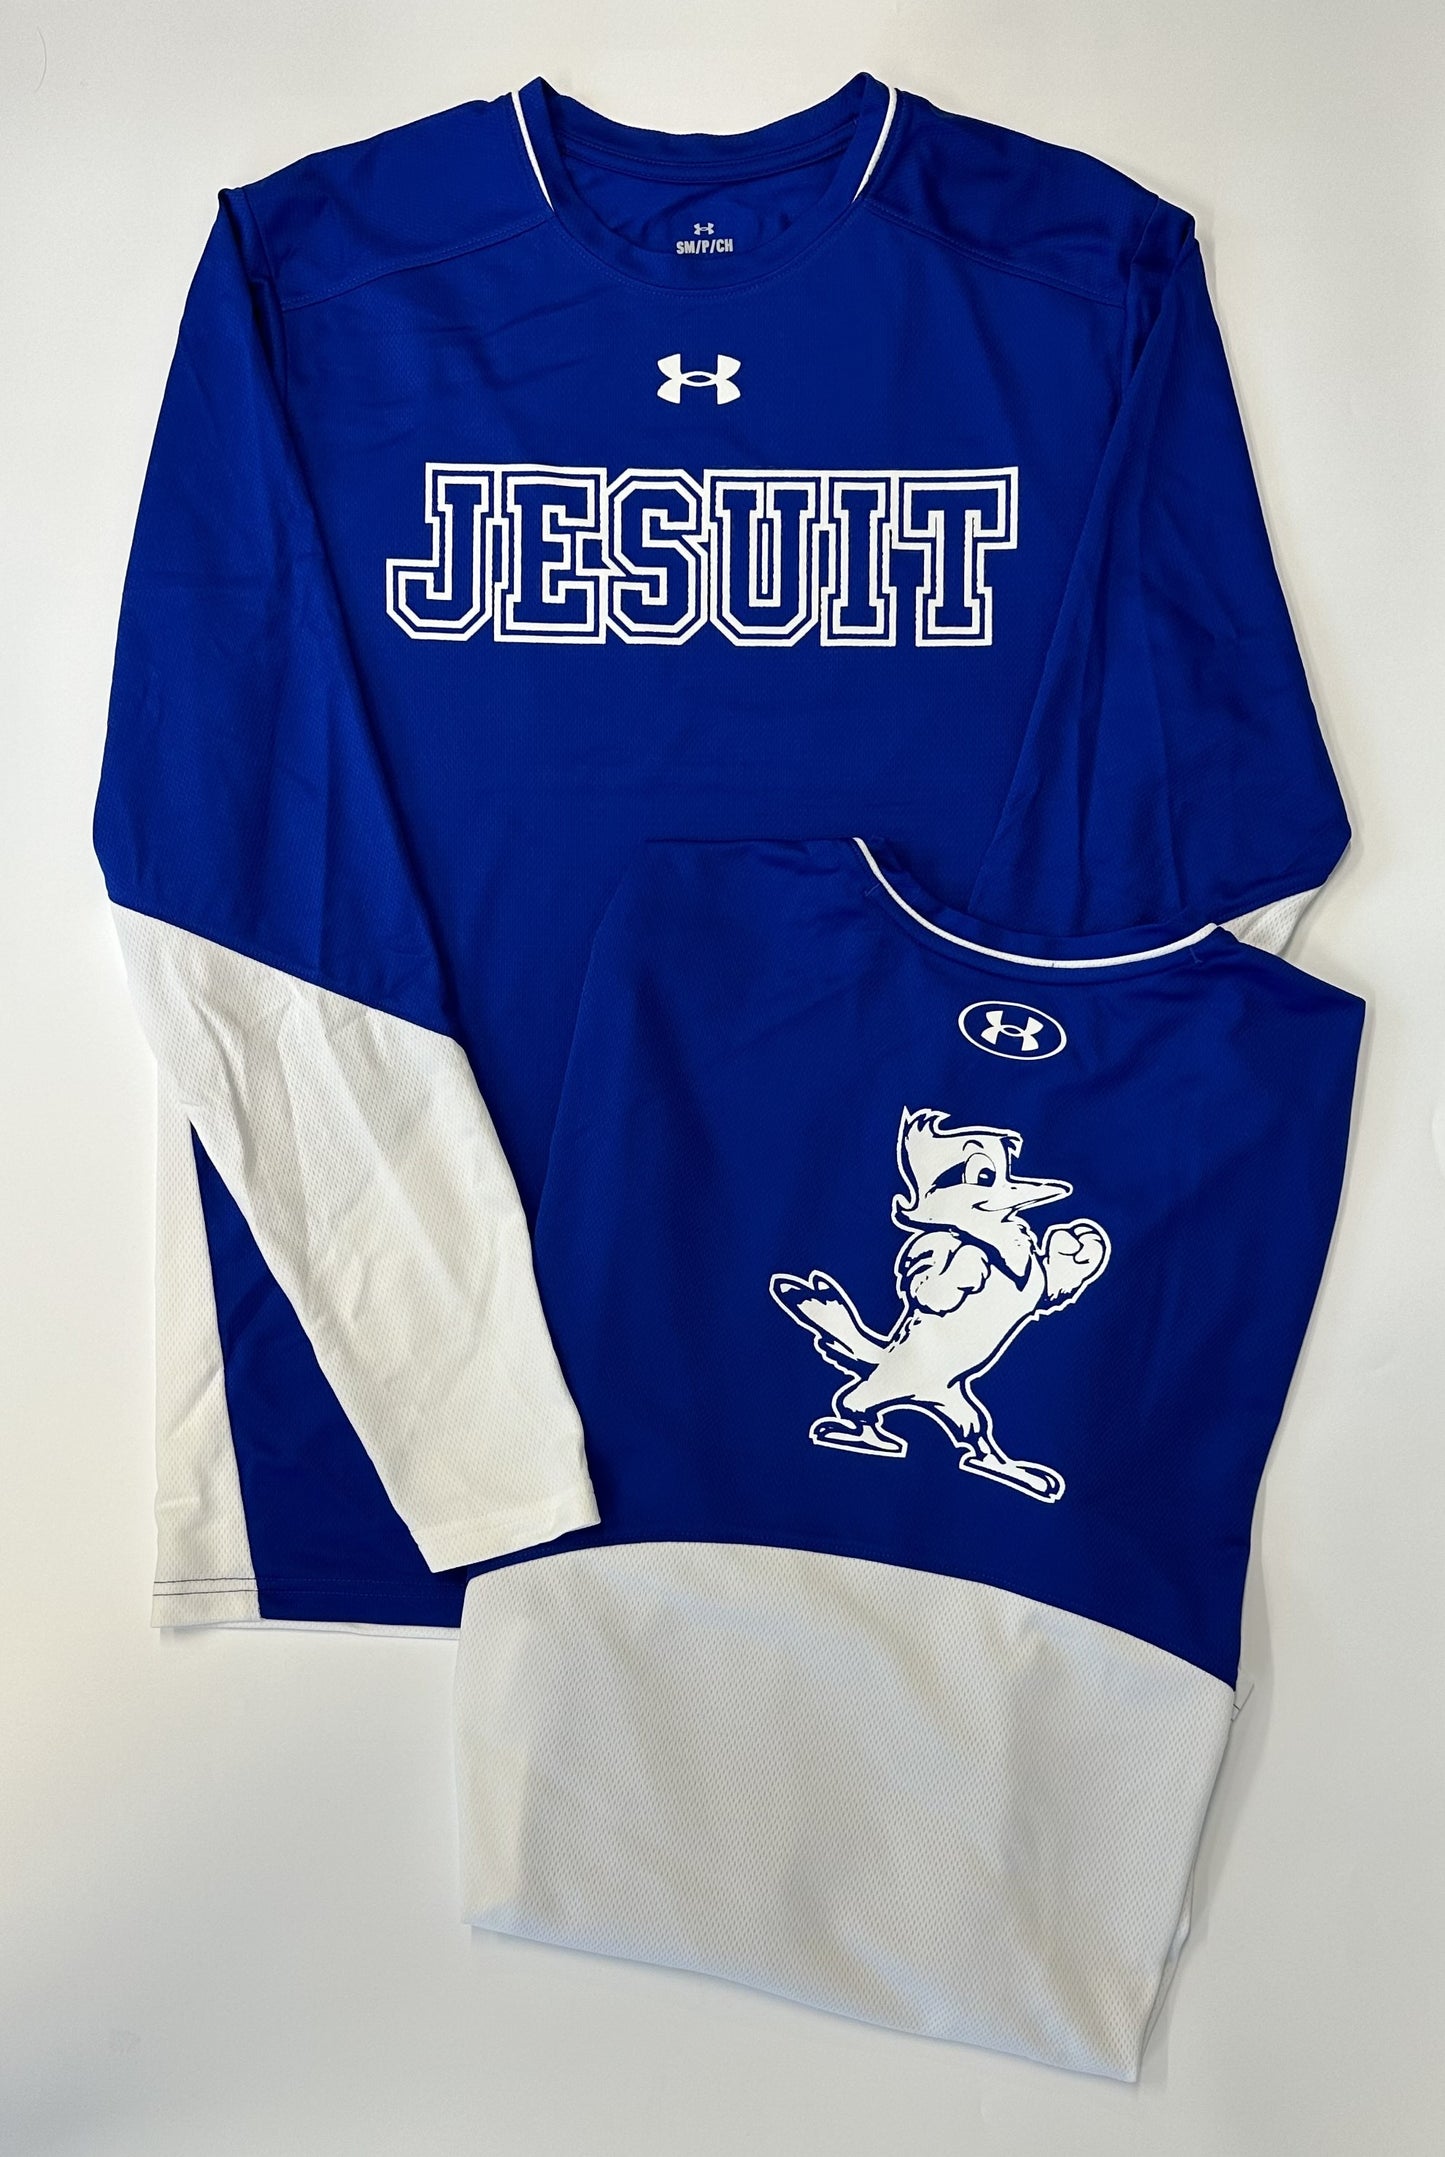 Under Armour.  100% Polyester.  UA Tech fabric is quick-drying.  Material wicks sweat & dries really fast.  Flatlock stitch and shoulder seam detail.   JESUIT logo on front with JAYSON on upper back.